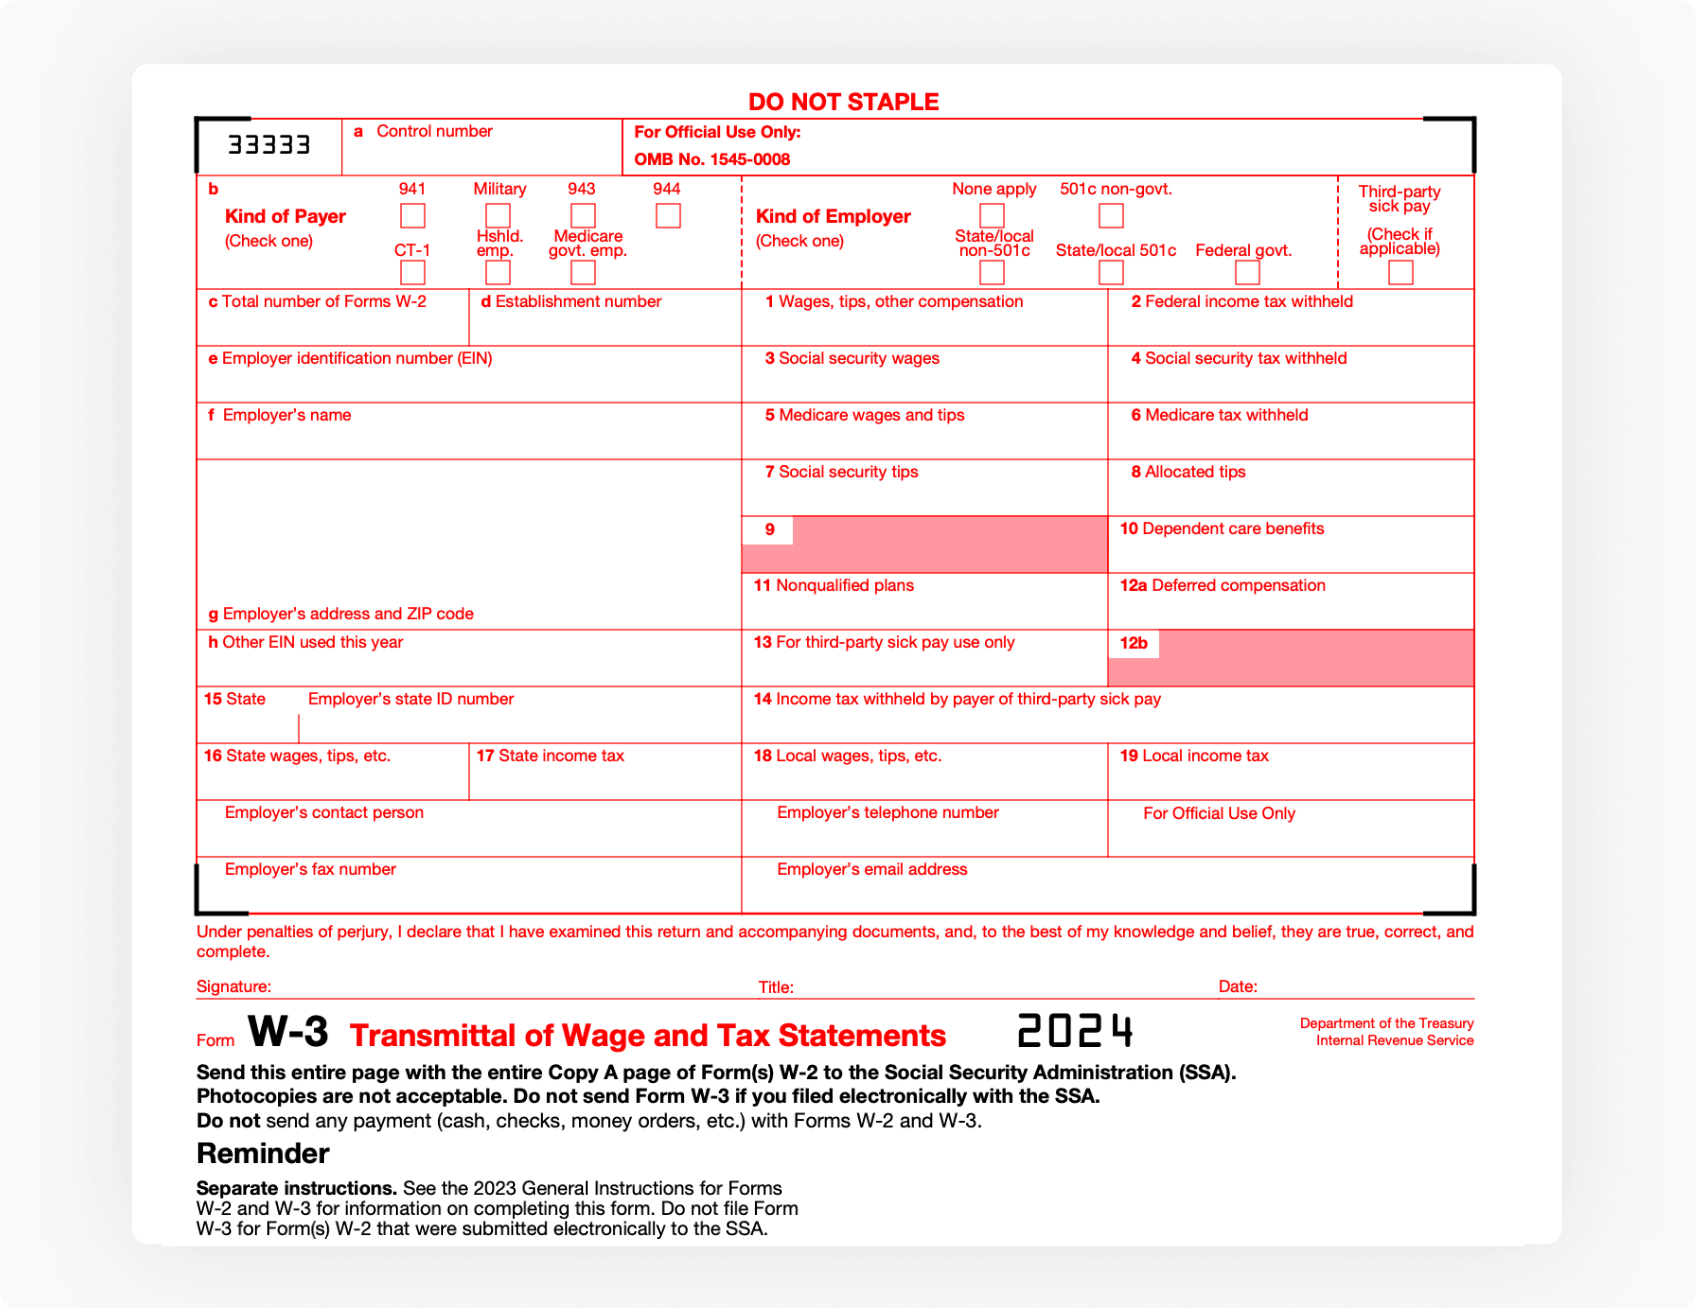 What Is W3 Form - Transmittal Of Wage And Tax Statements in Where To Mail W2 And W3 Forms